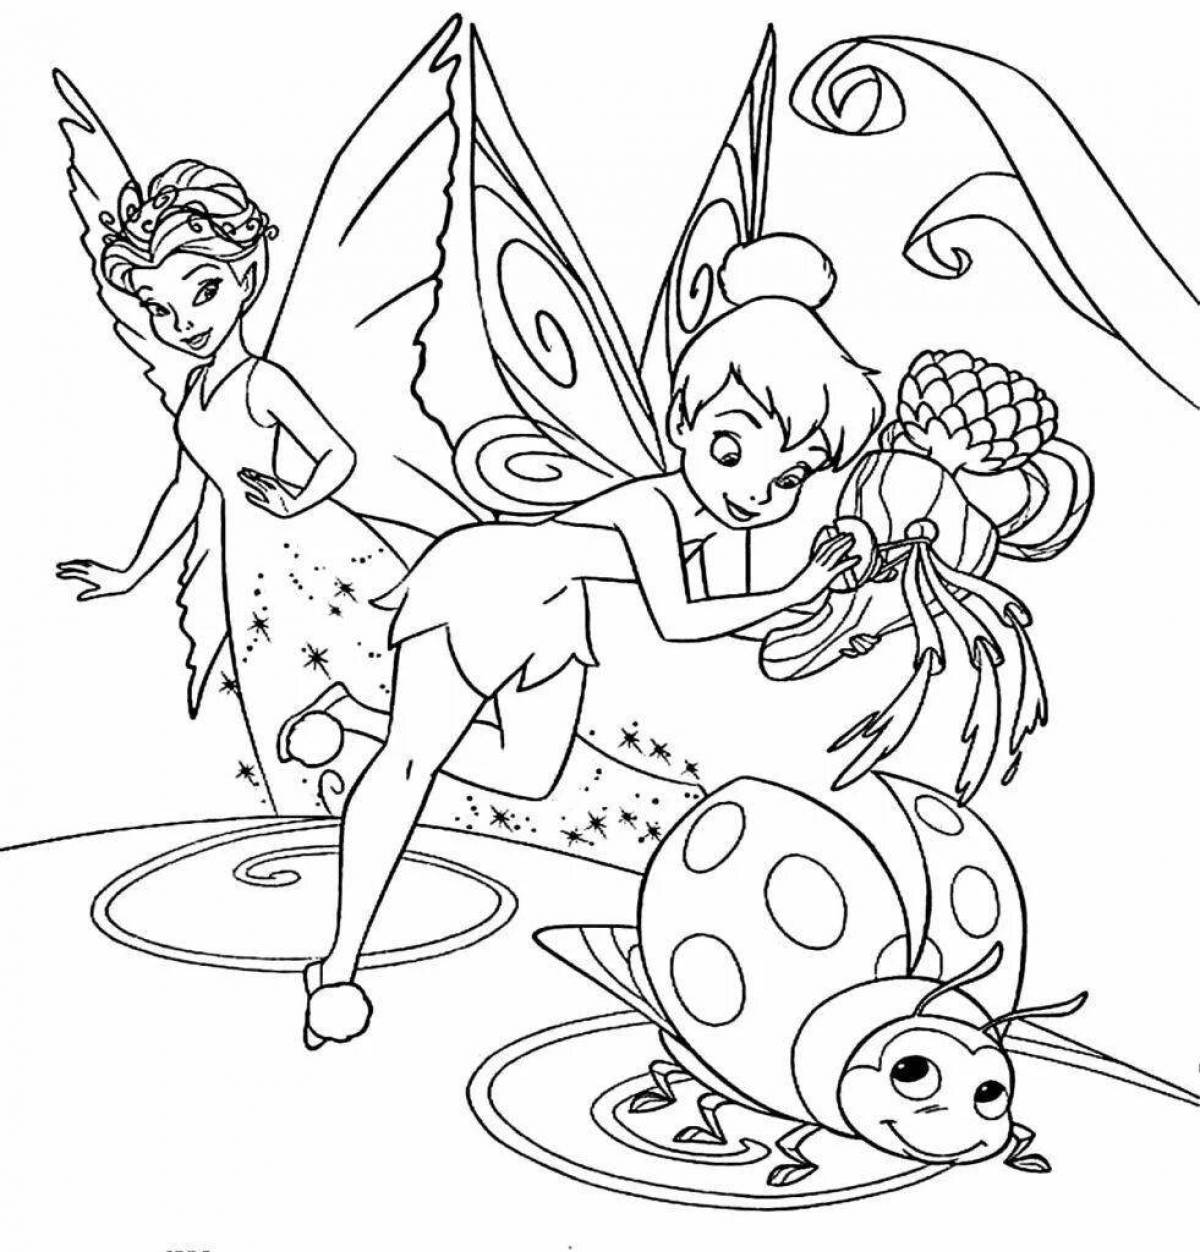 Fairy coloring pages for girls